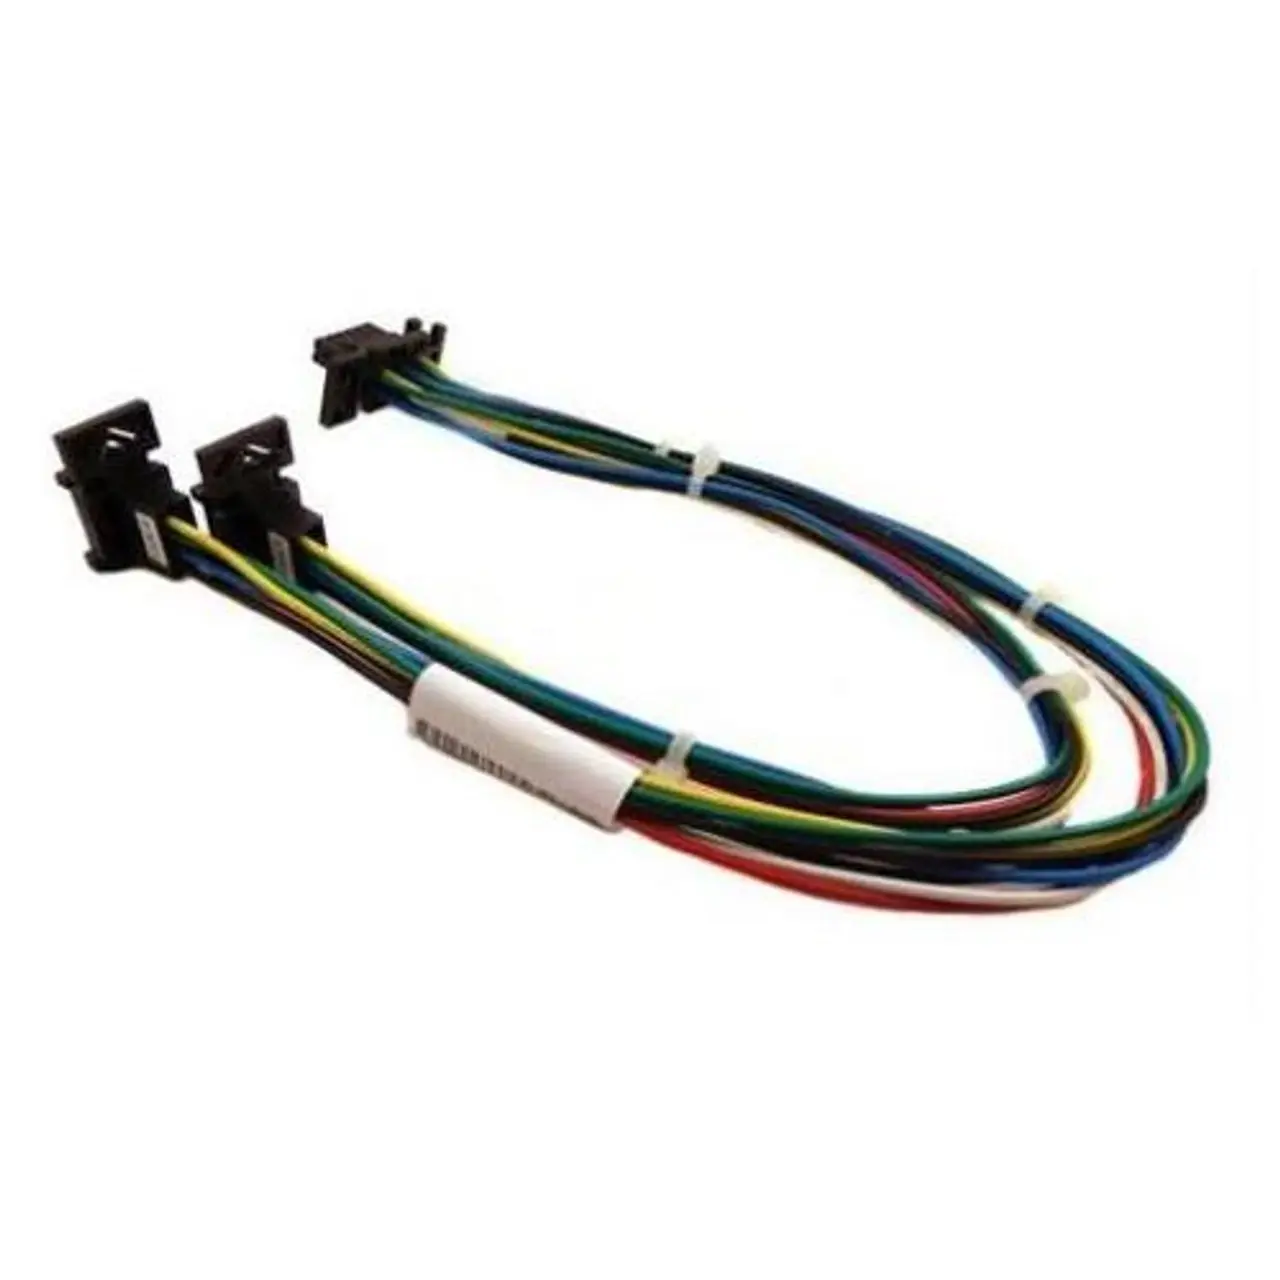 23R3717 IBM Tyco-GD PICO-D-P 13-inch Internal Cable Assembly